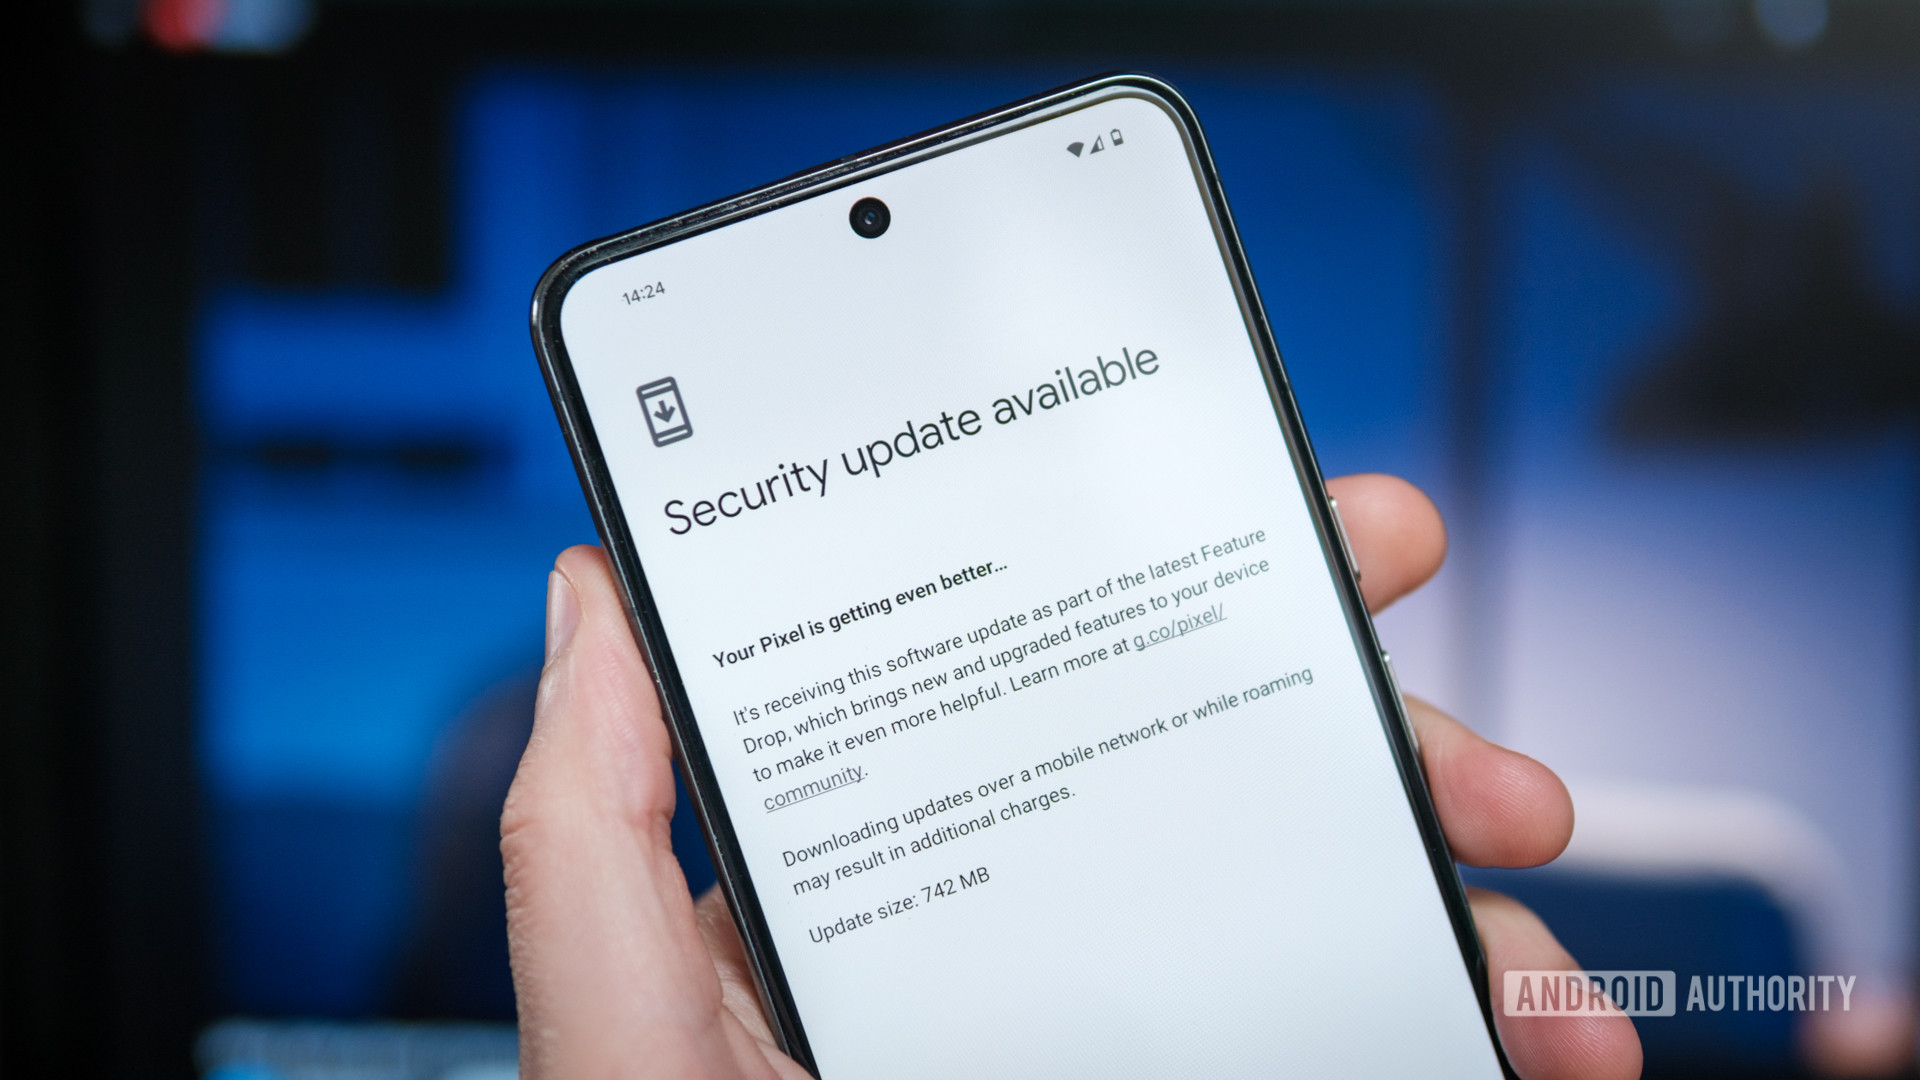 Security Update Available